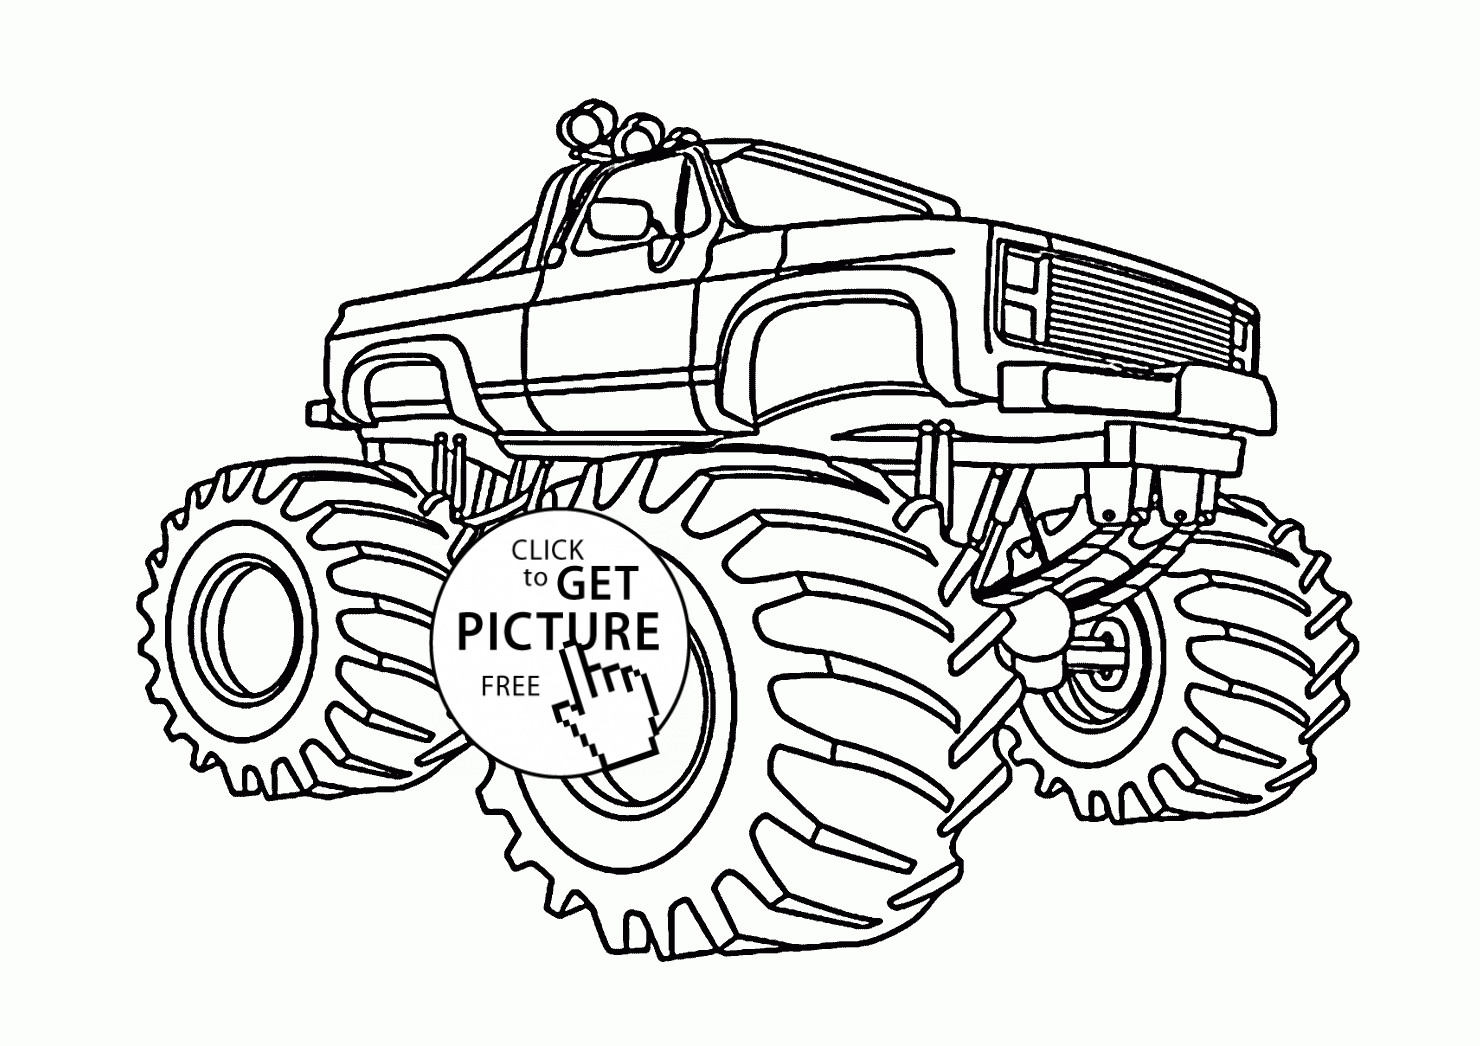 Trucks Coloring Pages For Kids
 49 Big Trucks Coloring Pages Big Trucks Coloring Pages